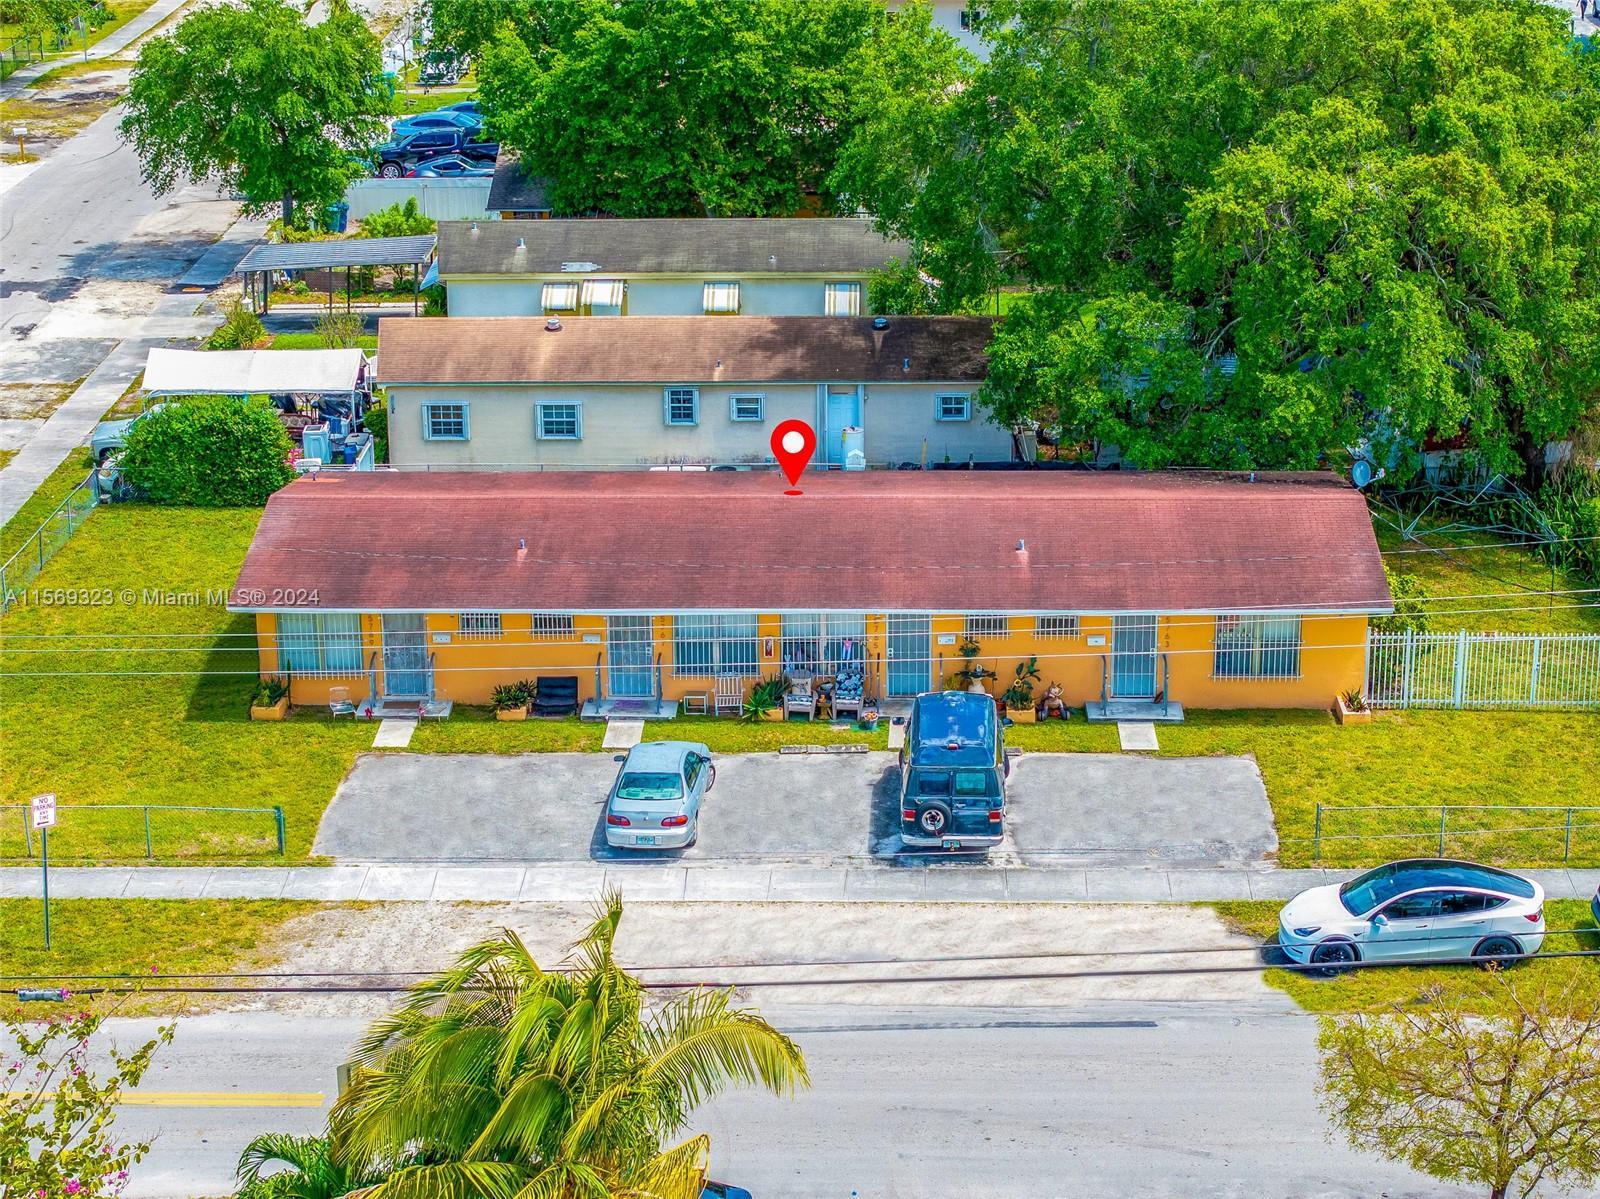 Turnkey legal fourplex in the Hialeah Heights subdivision of Miami, FL. Situated on a spacious 10,80